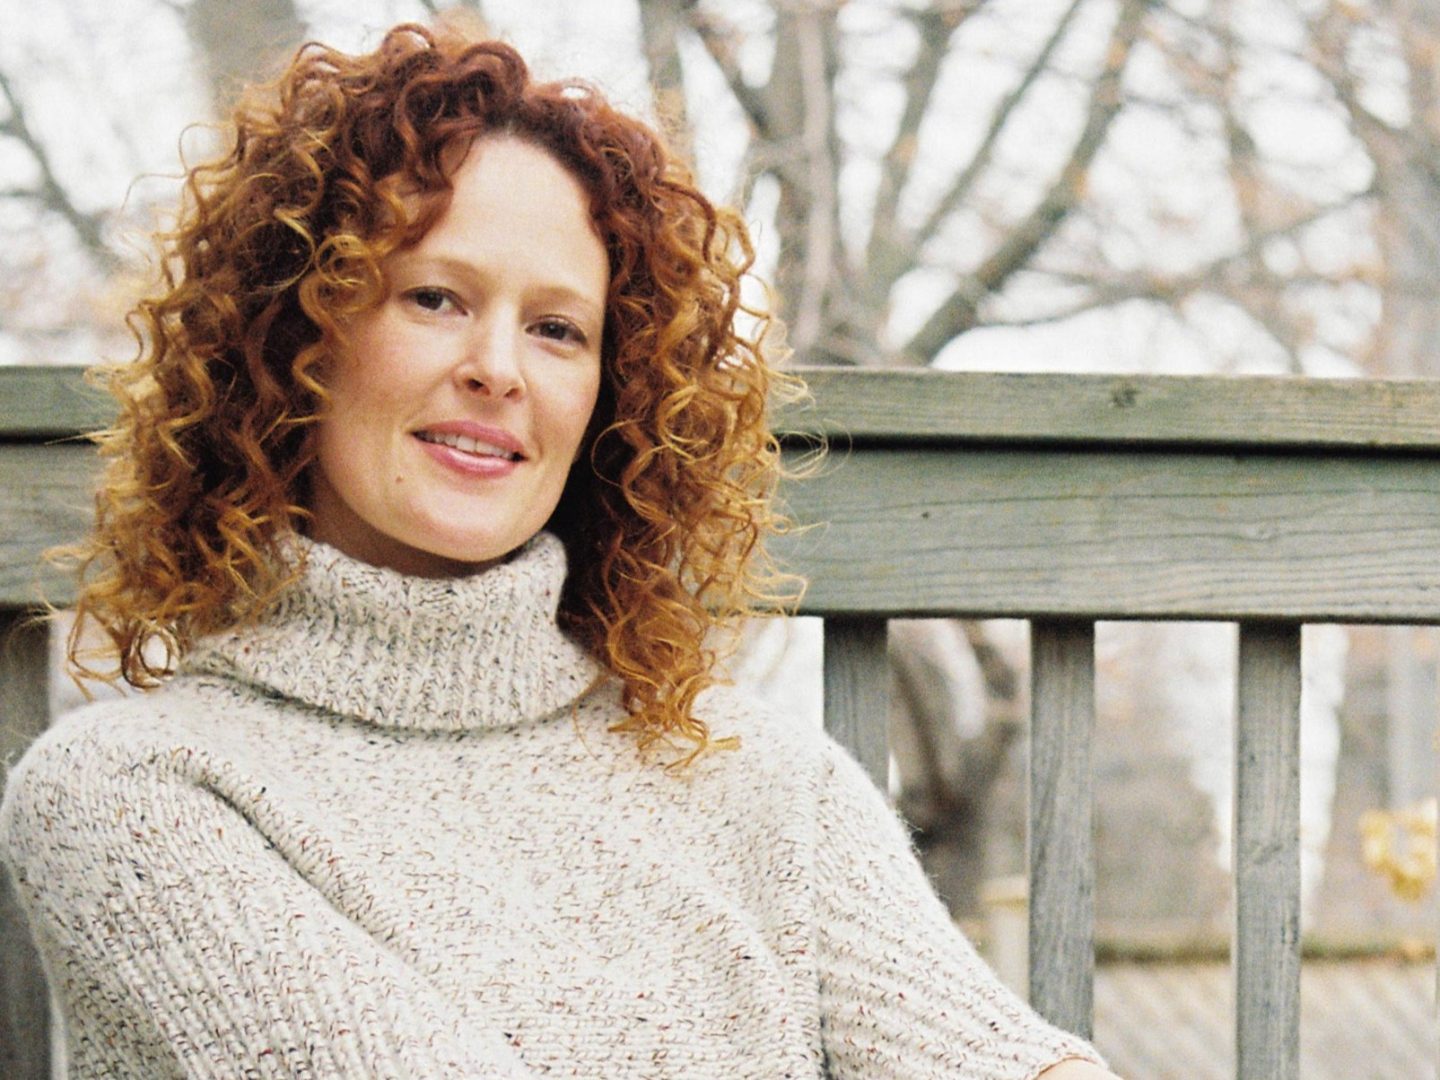 Portrait of Julie Riches, a white woman with curly red hair wearing a light grey knit sweater sitting on an armchair outside.